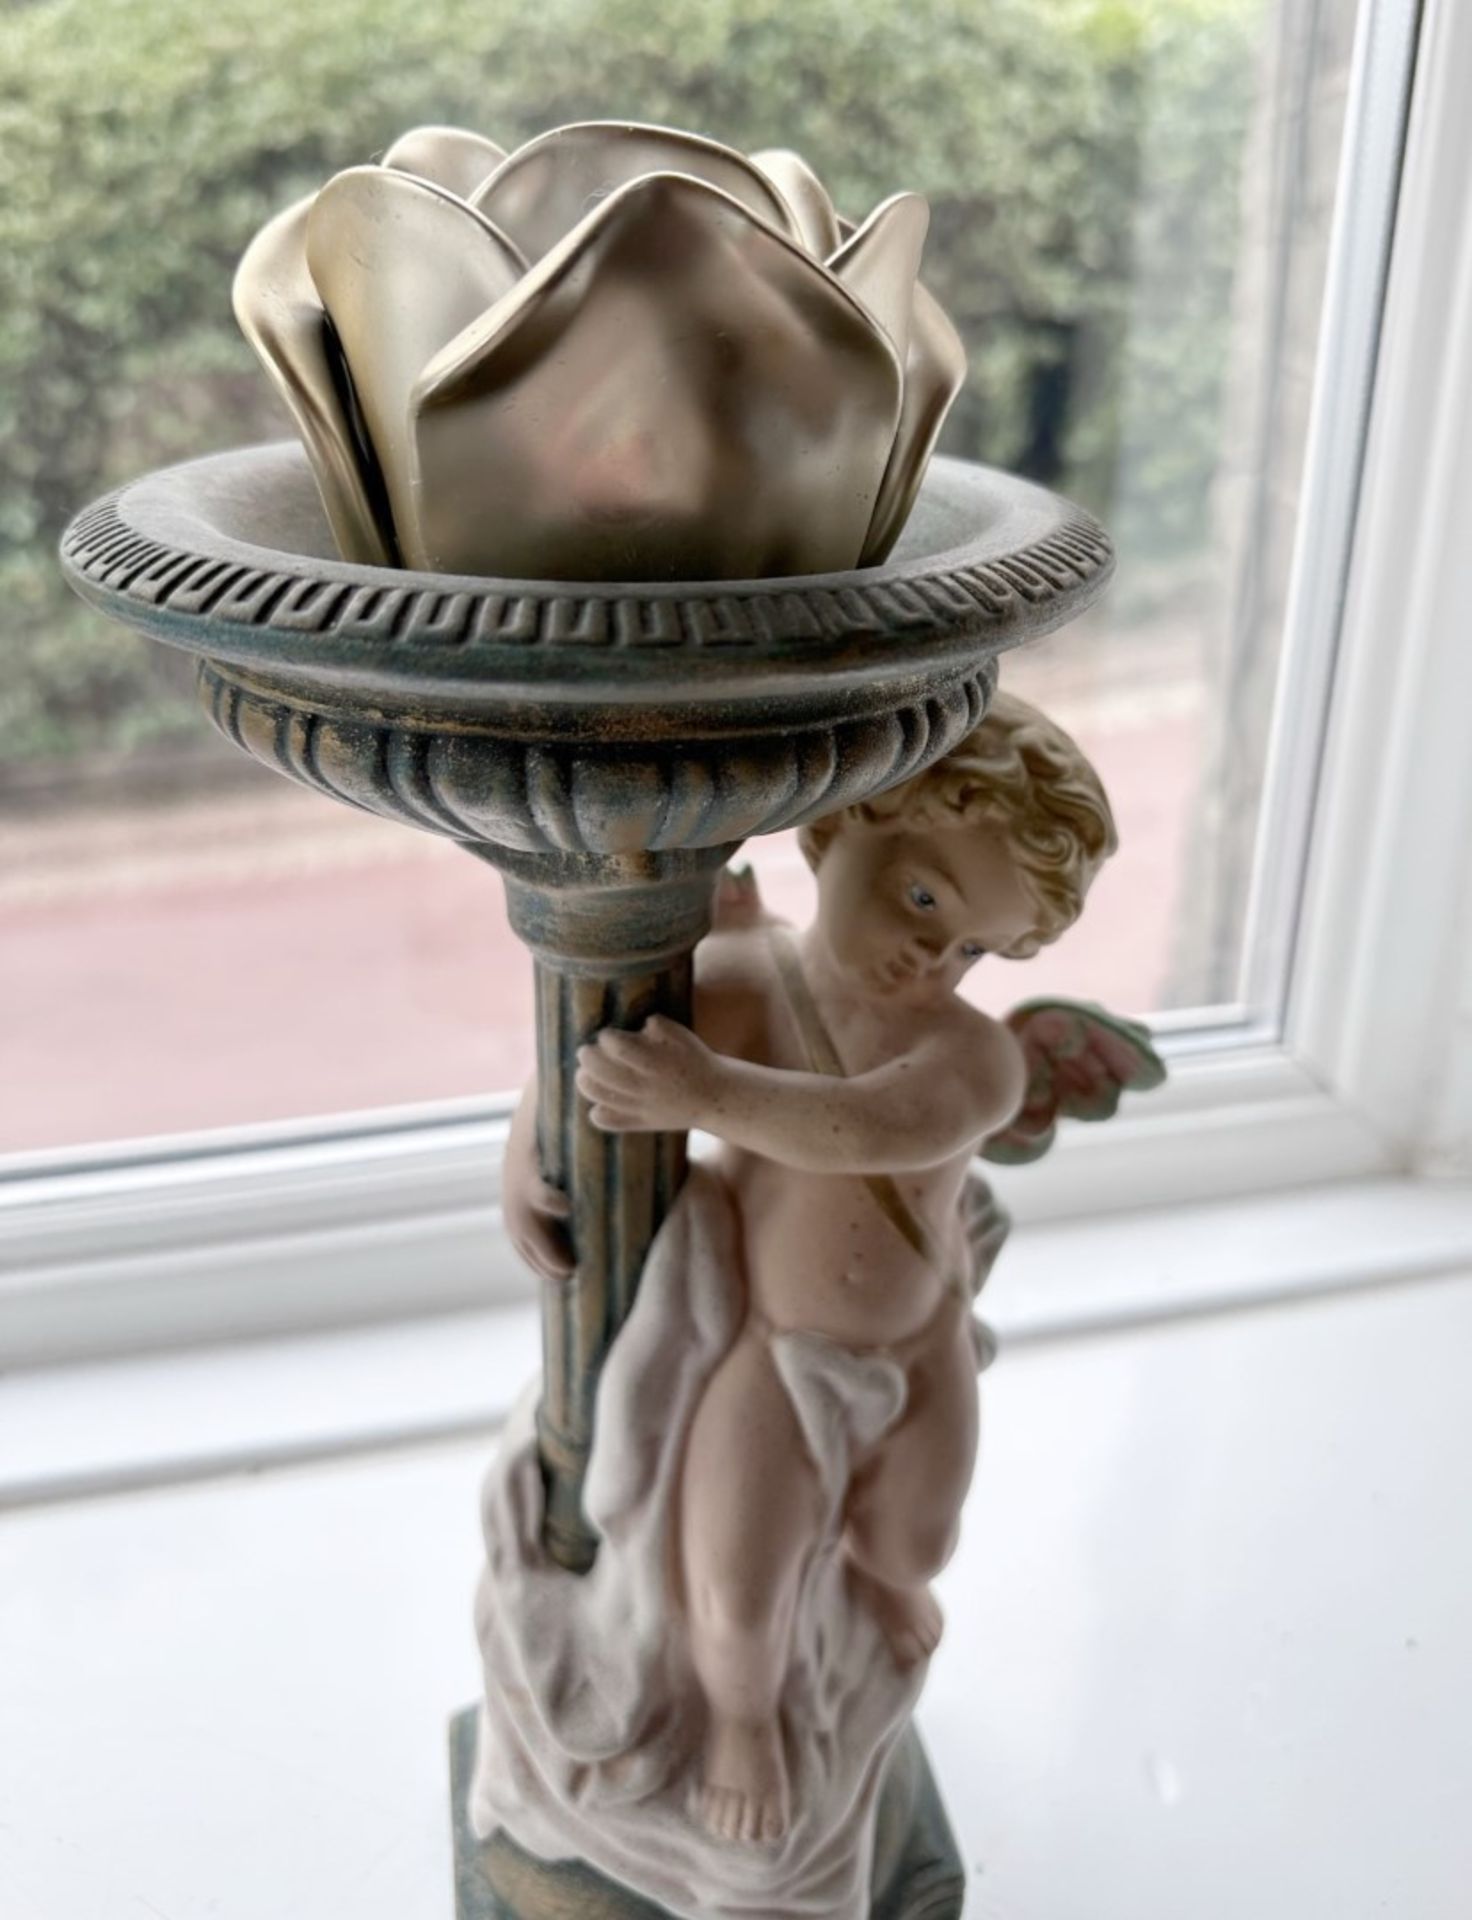 2 x Vintage French Porcelain Cherub Candle Holders - Image 6 of 9